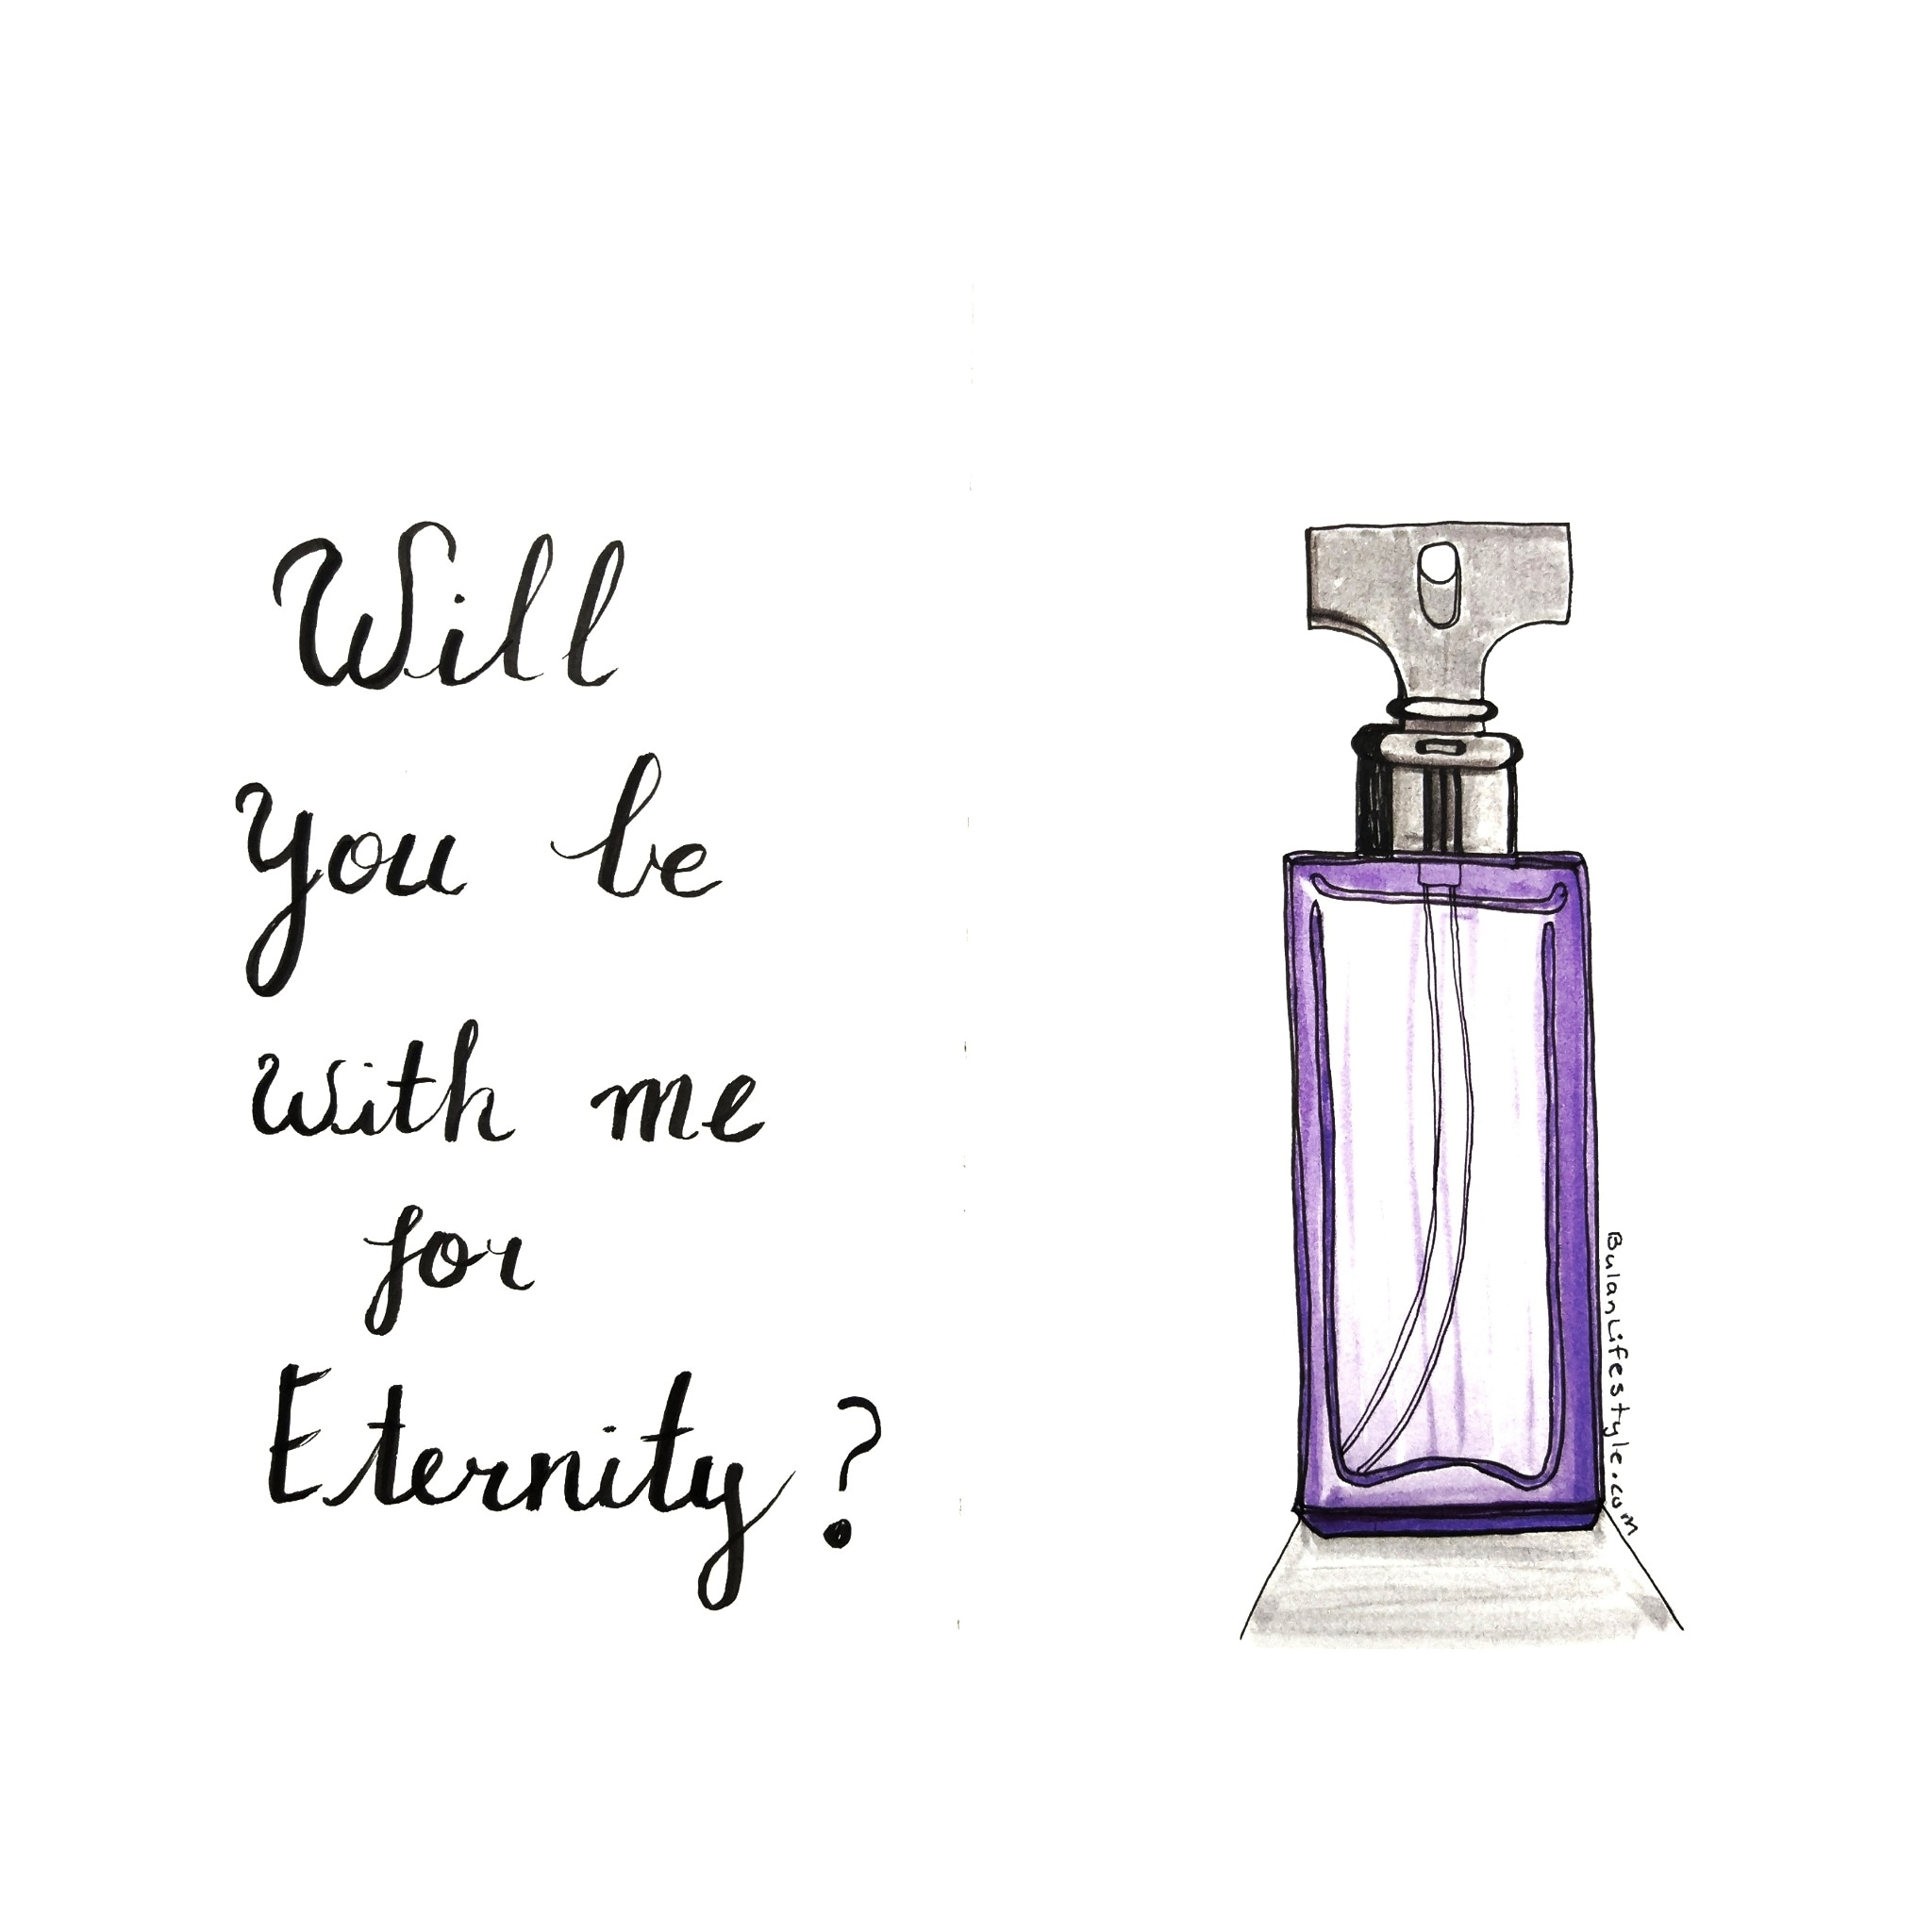 Will you be with me for eternity?